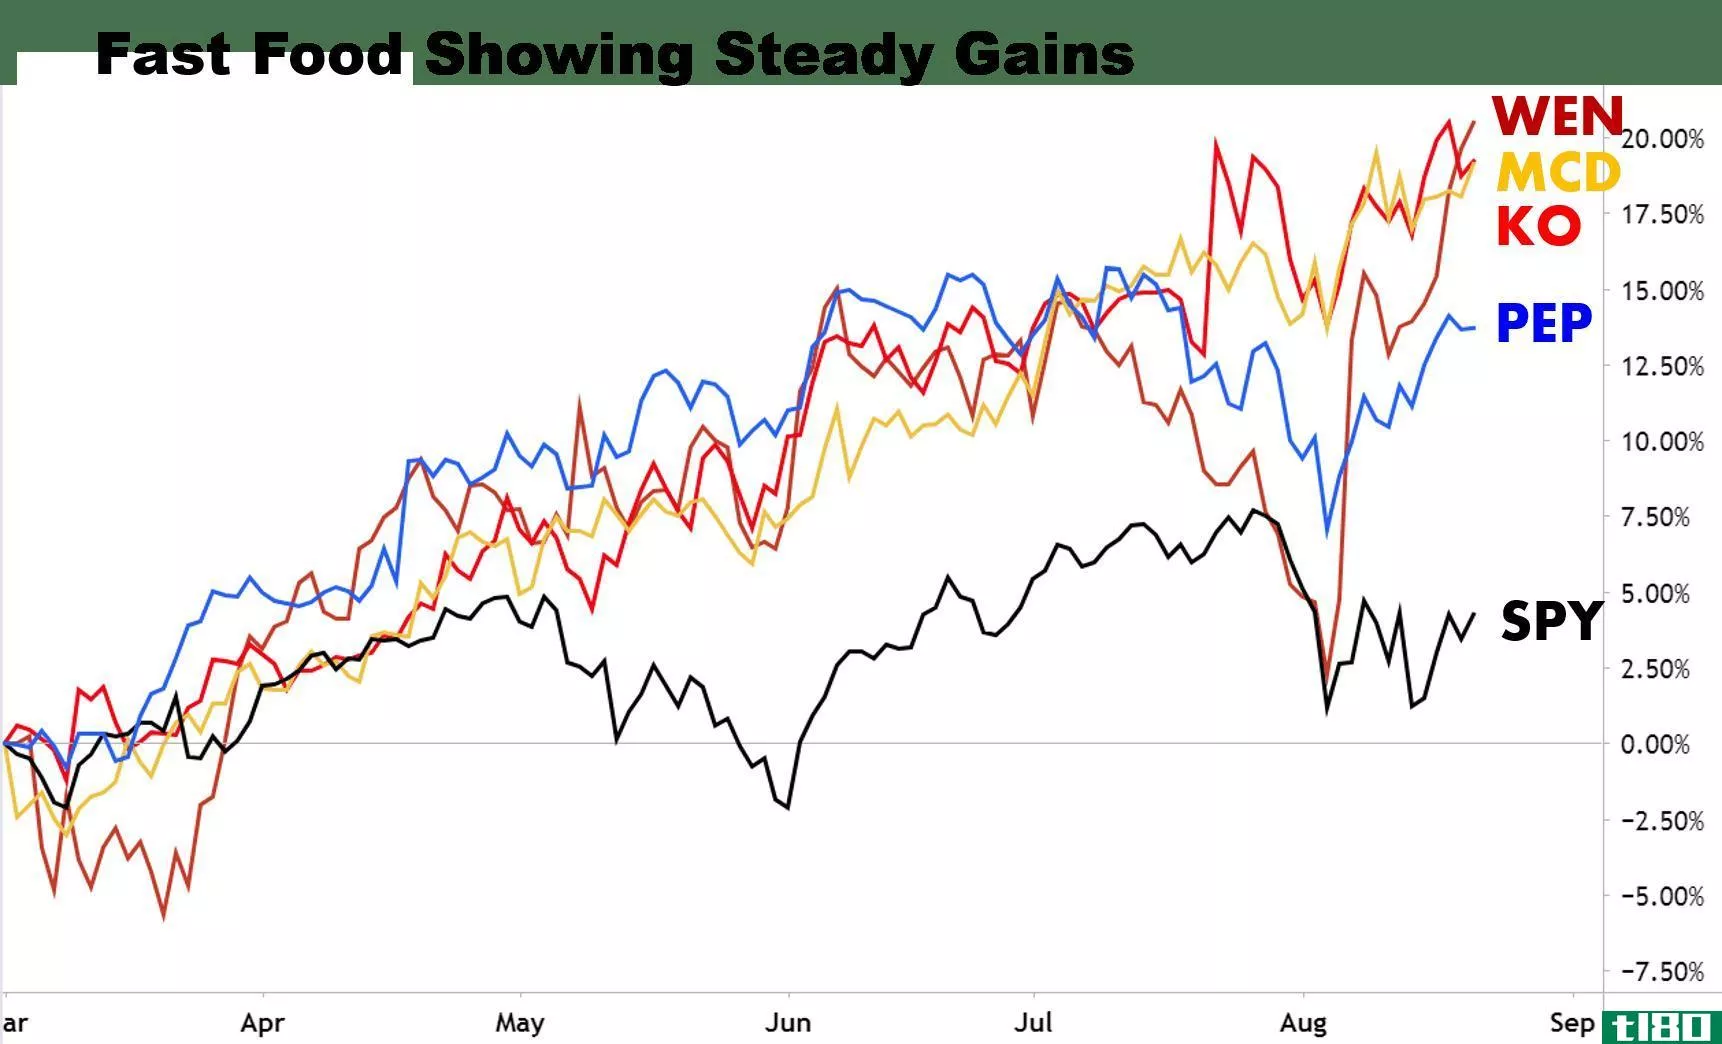 Chart showing the performance of fast food stocks